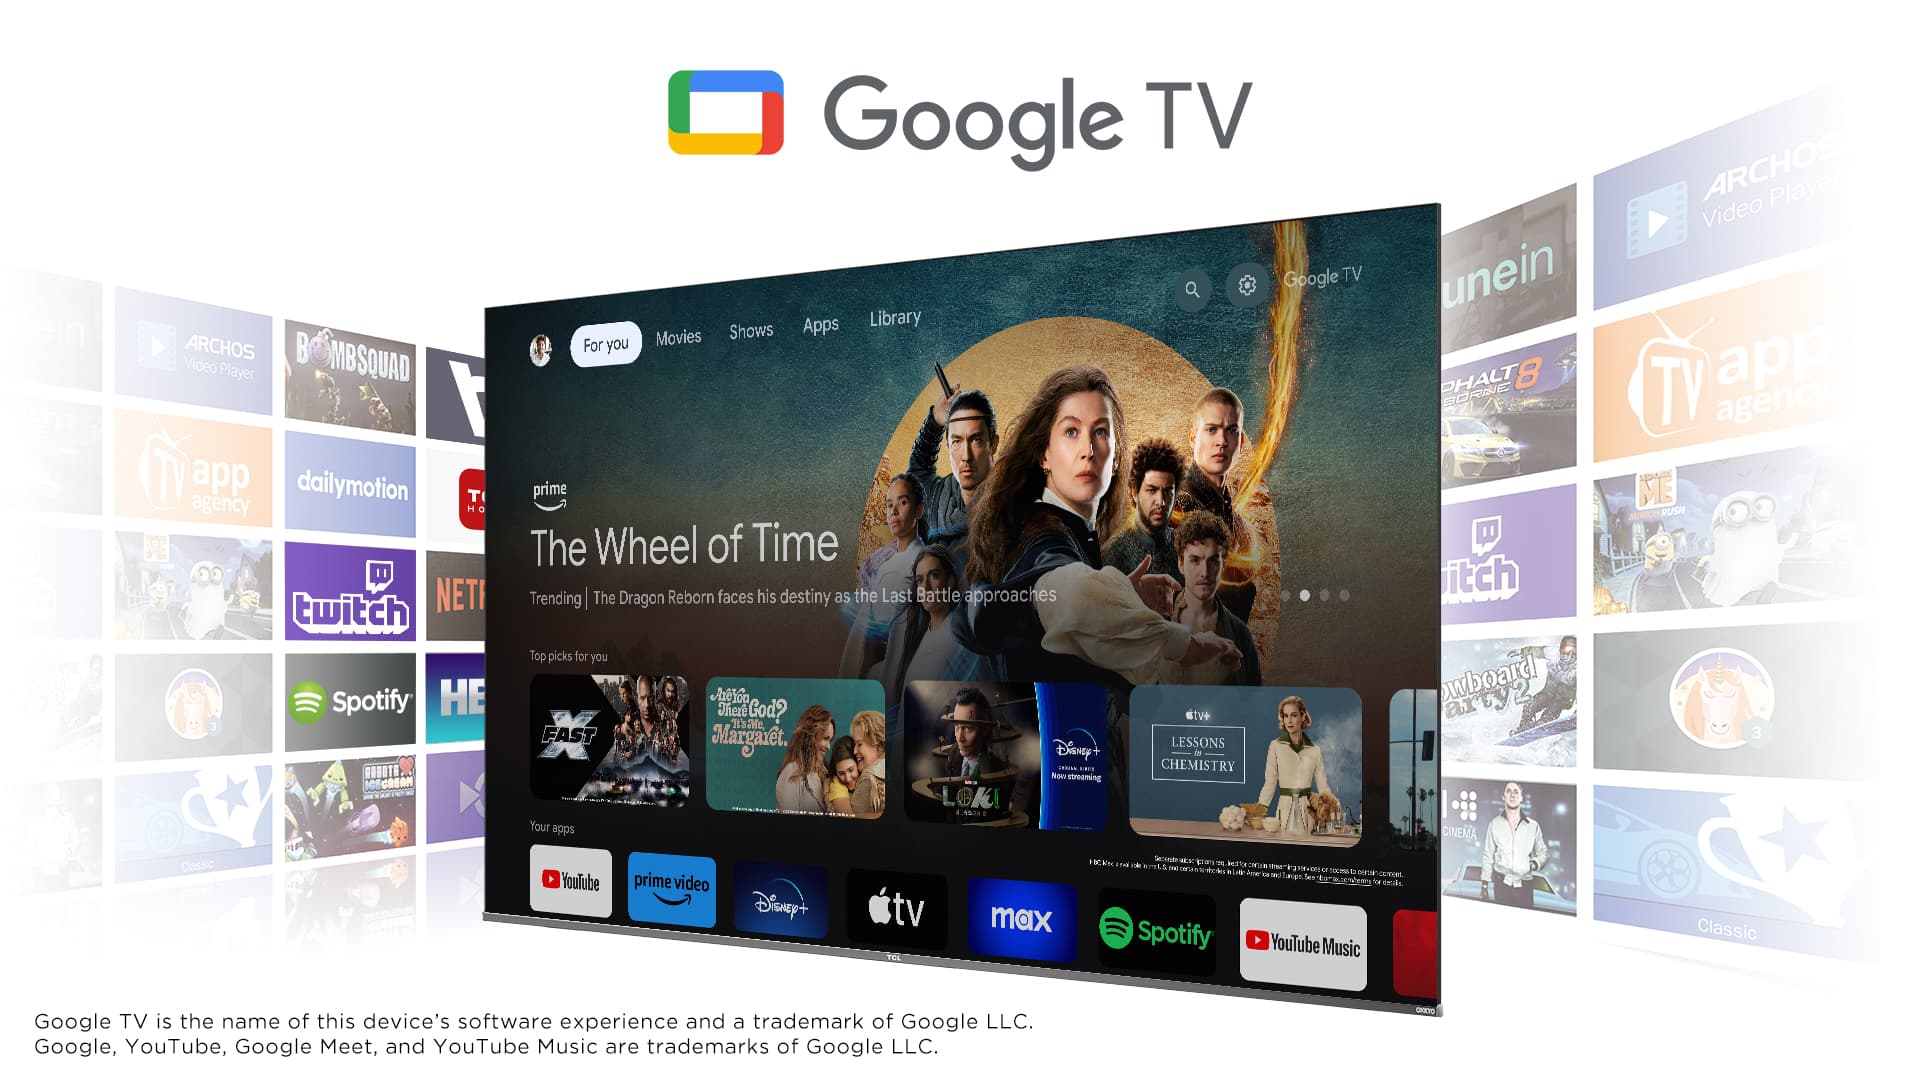 TCL 115" X955 can use in Google TV